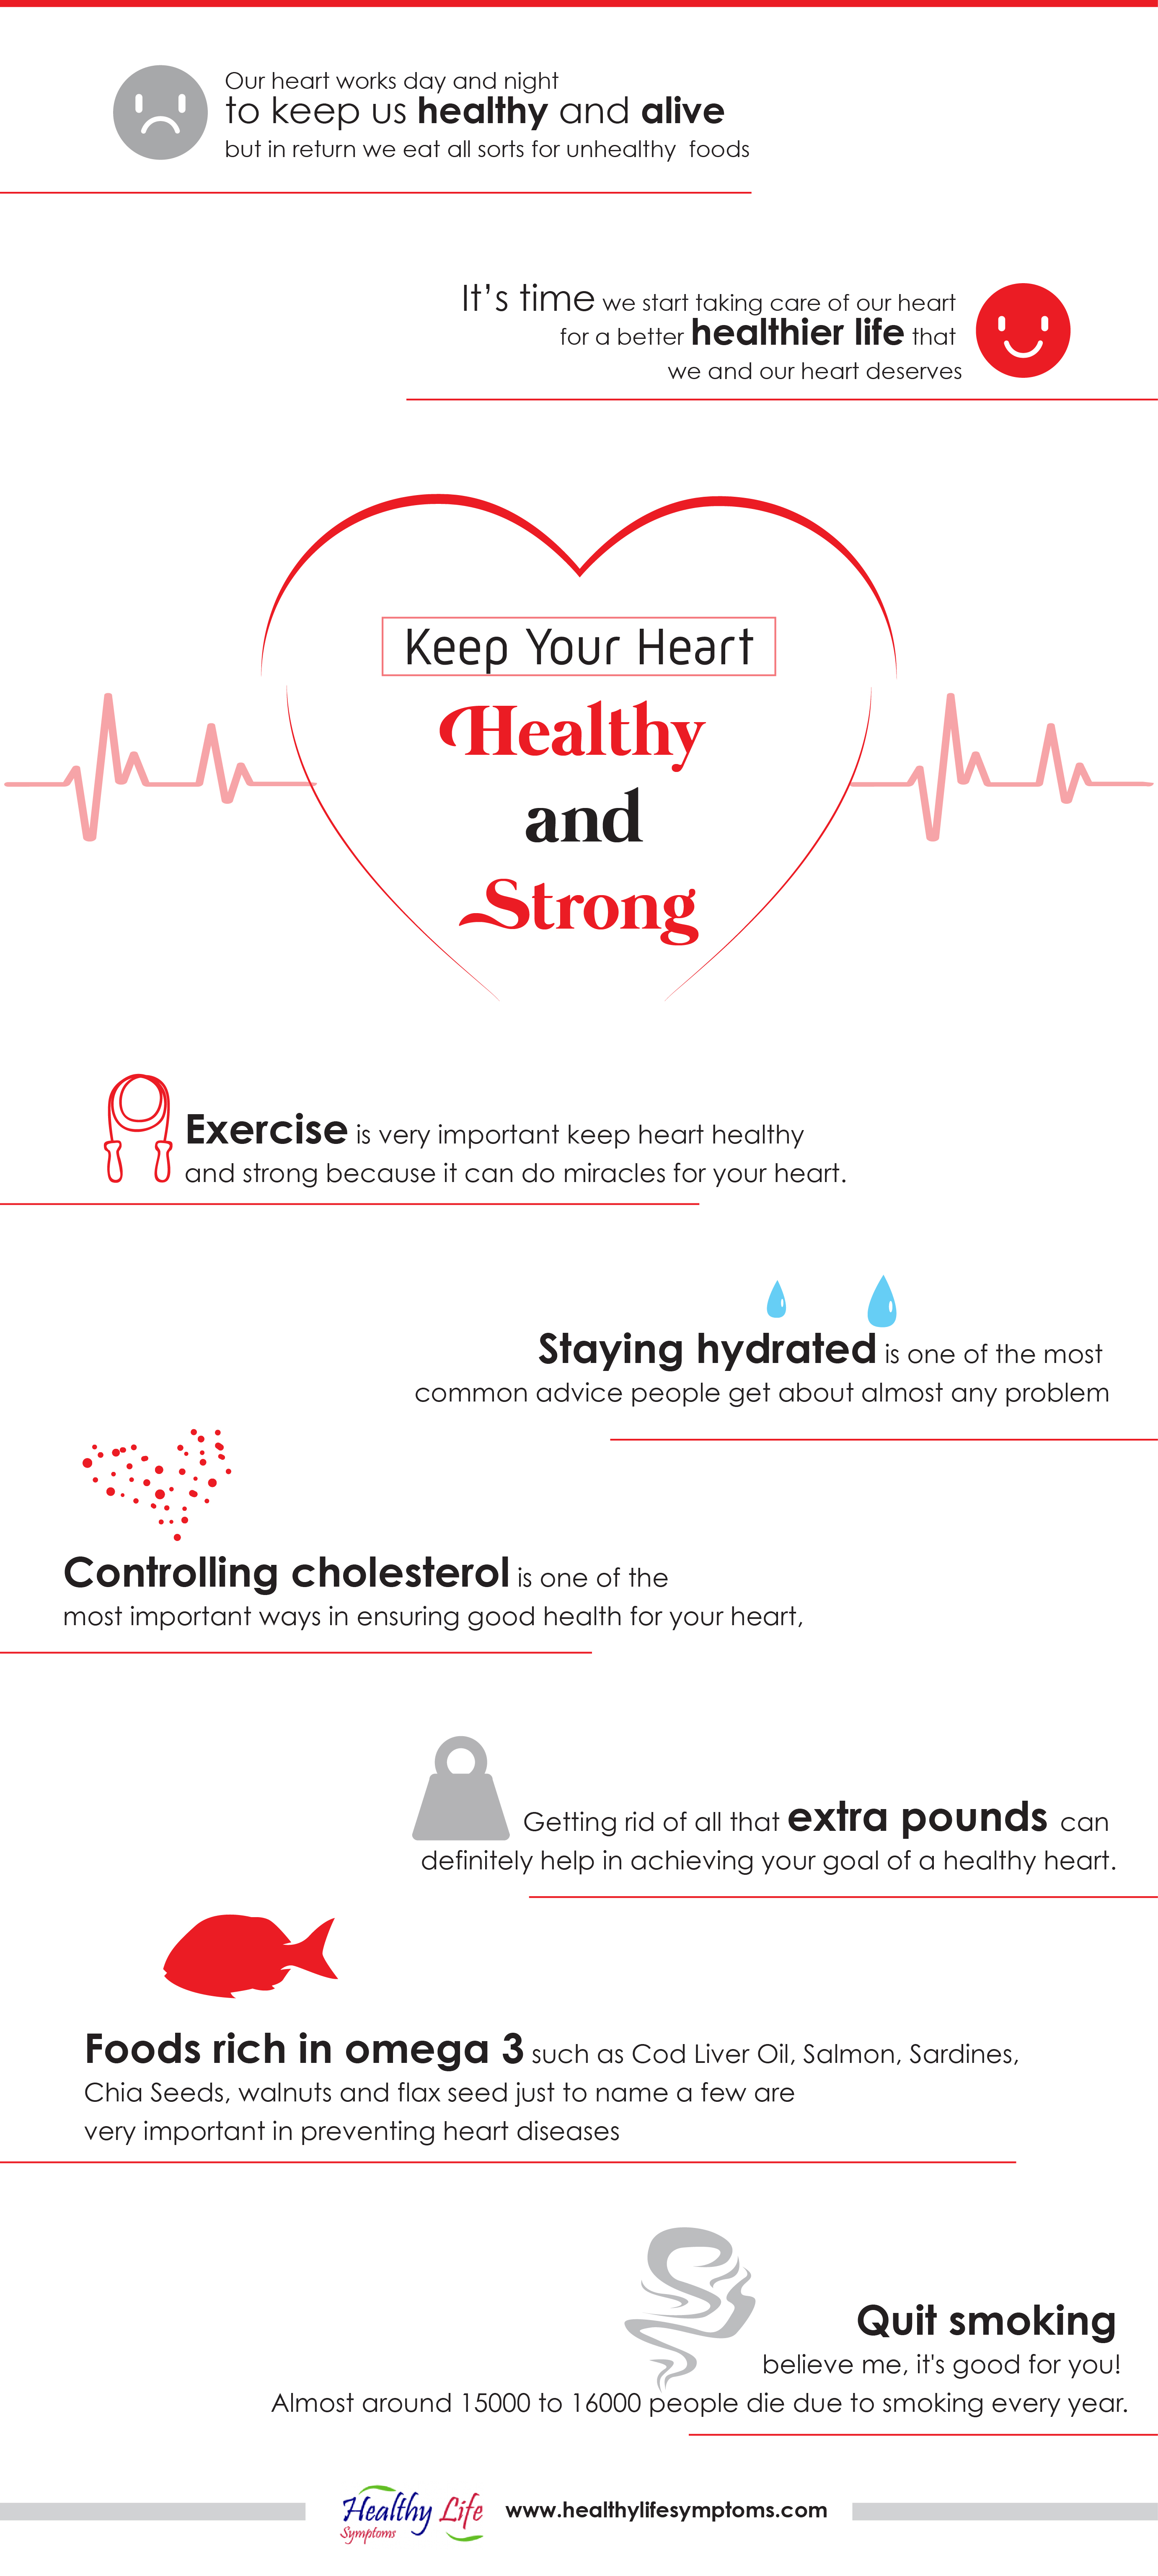 healthy-heart-infographic-plaza